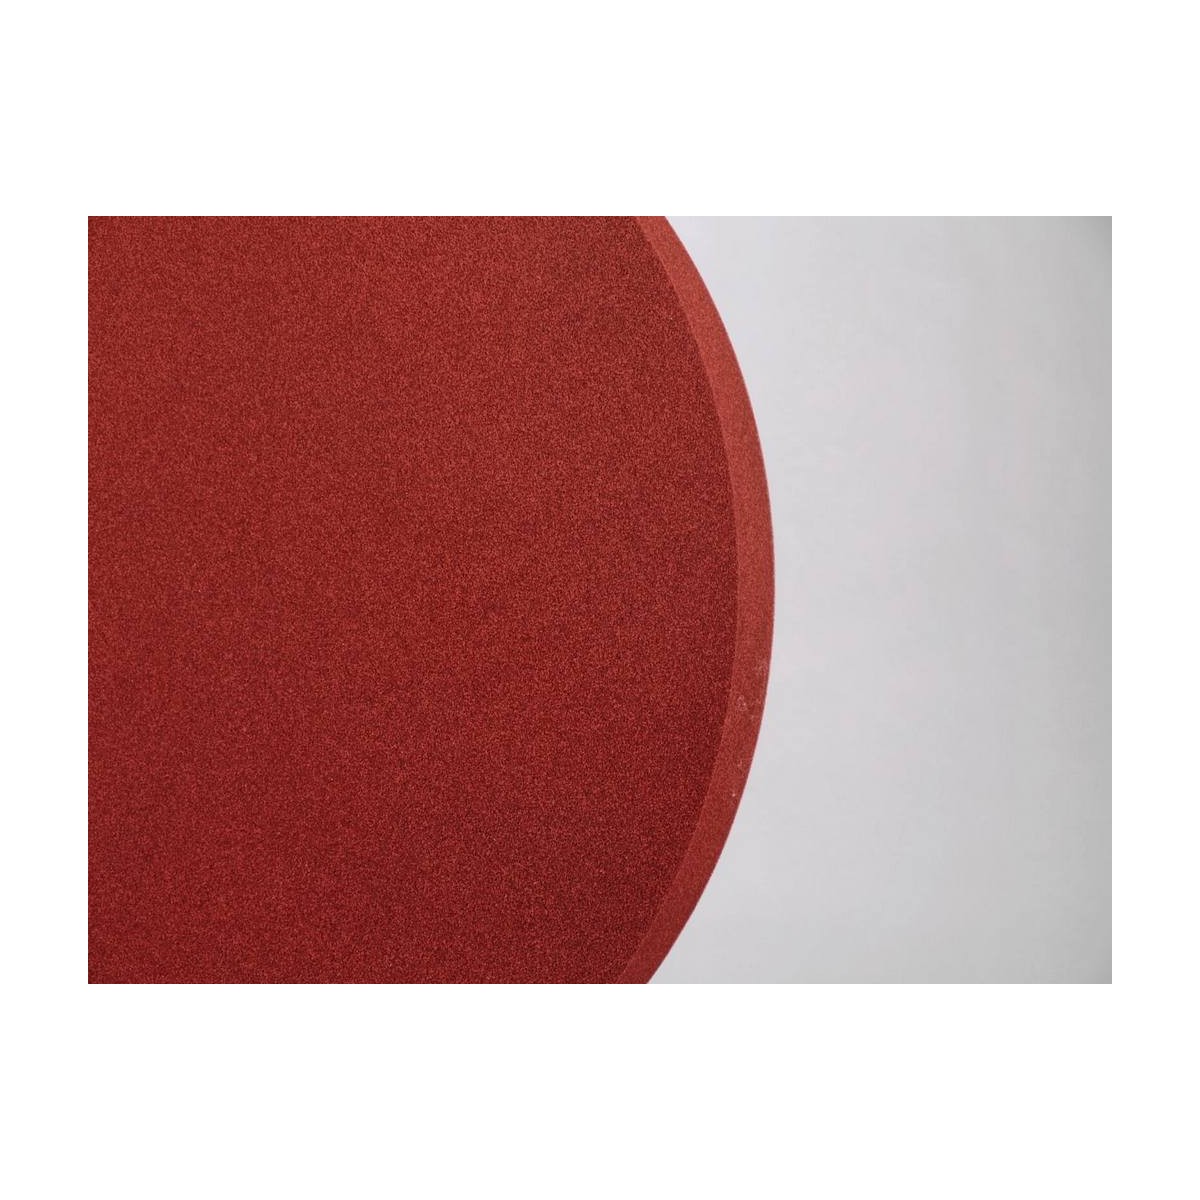 EliAcoustic Circle Pure Red